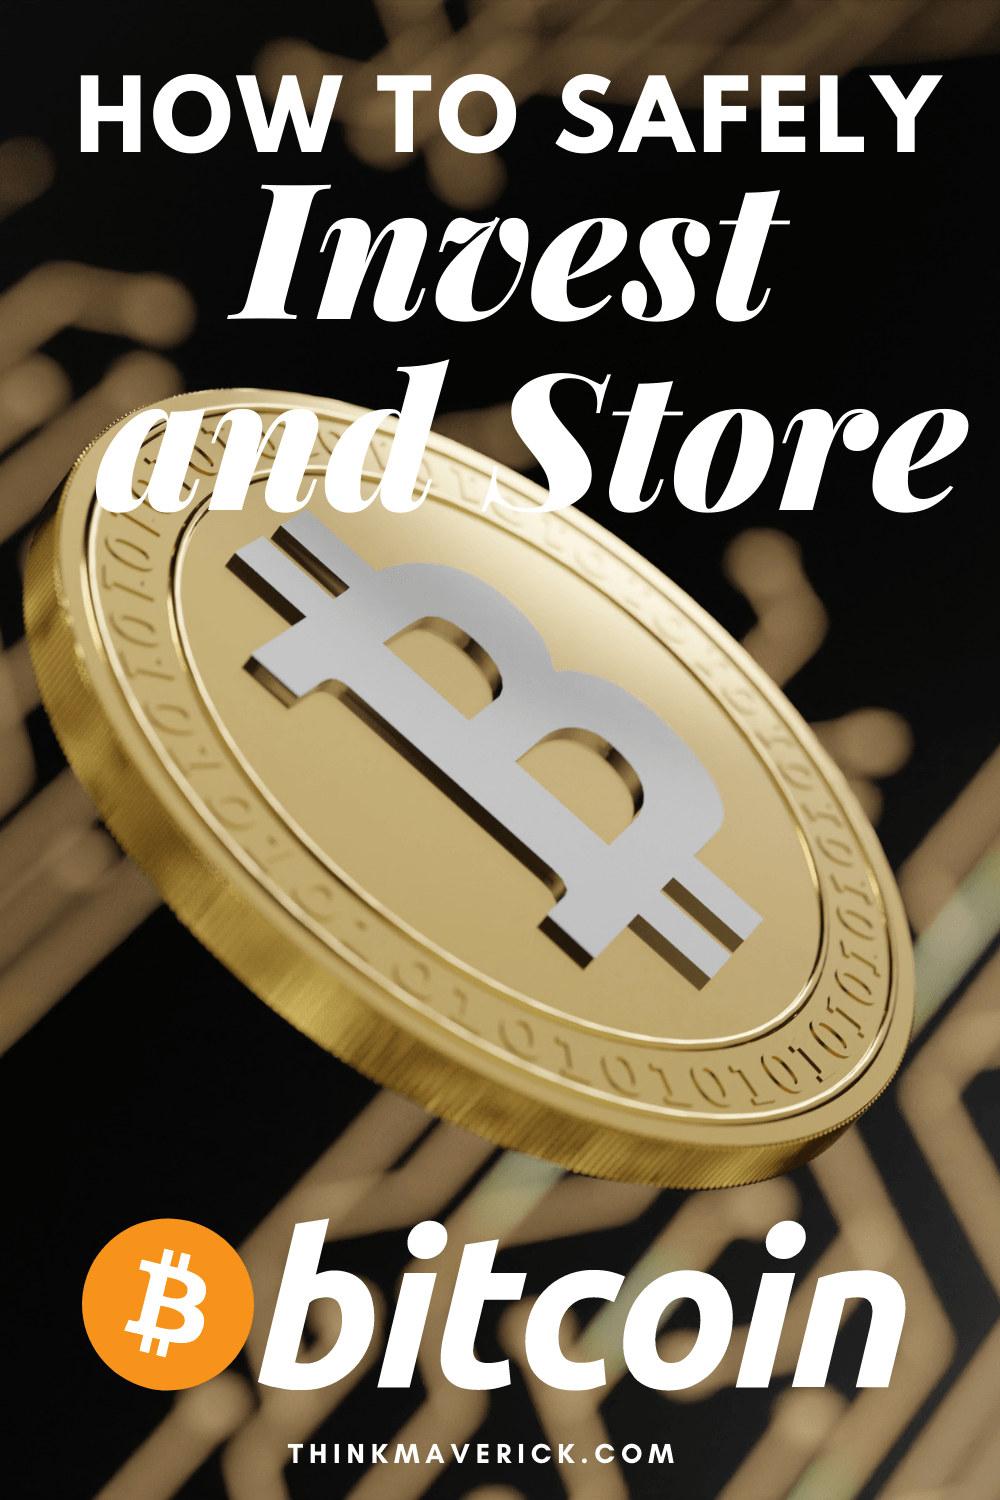 How to Safely Invest and Store Your Bitcoin. thinkmaverick